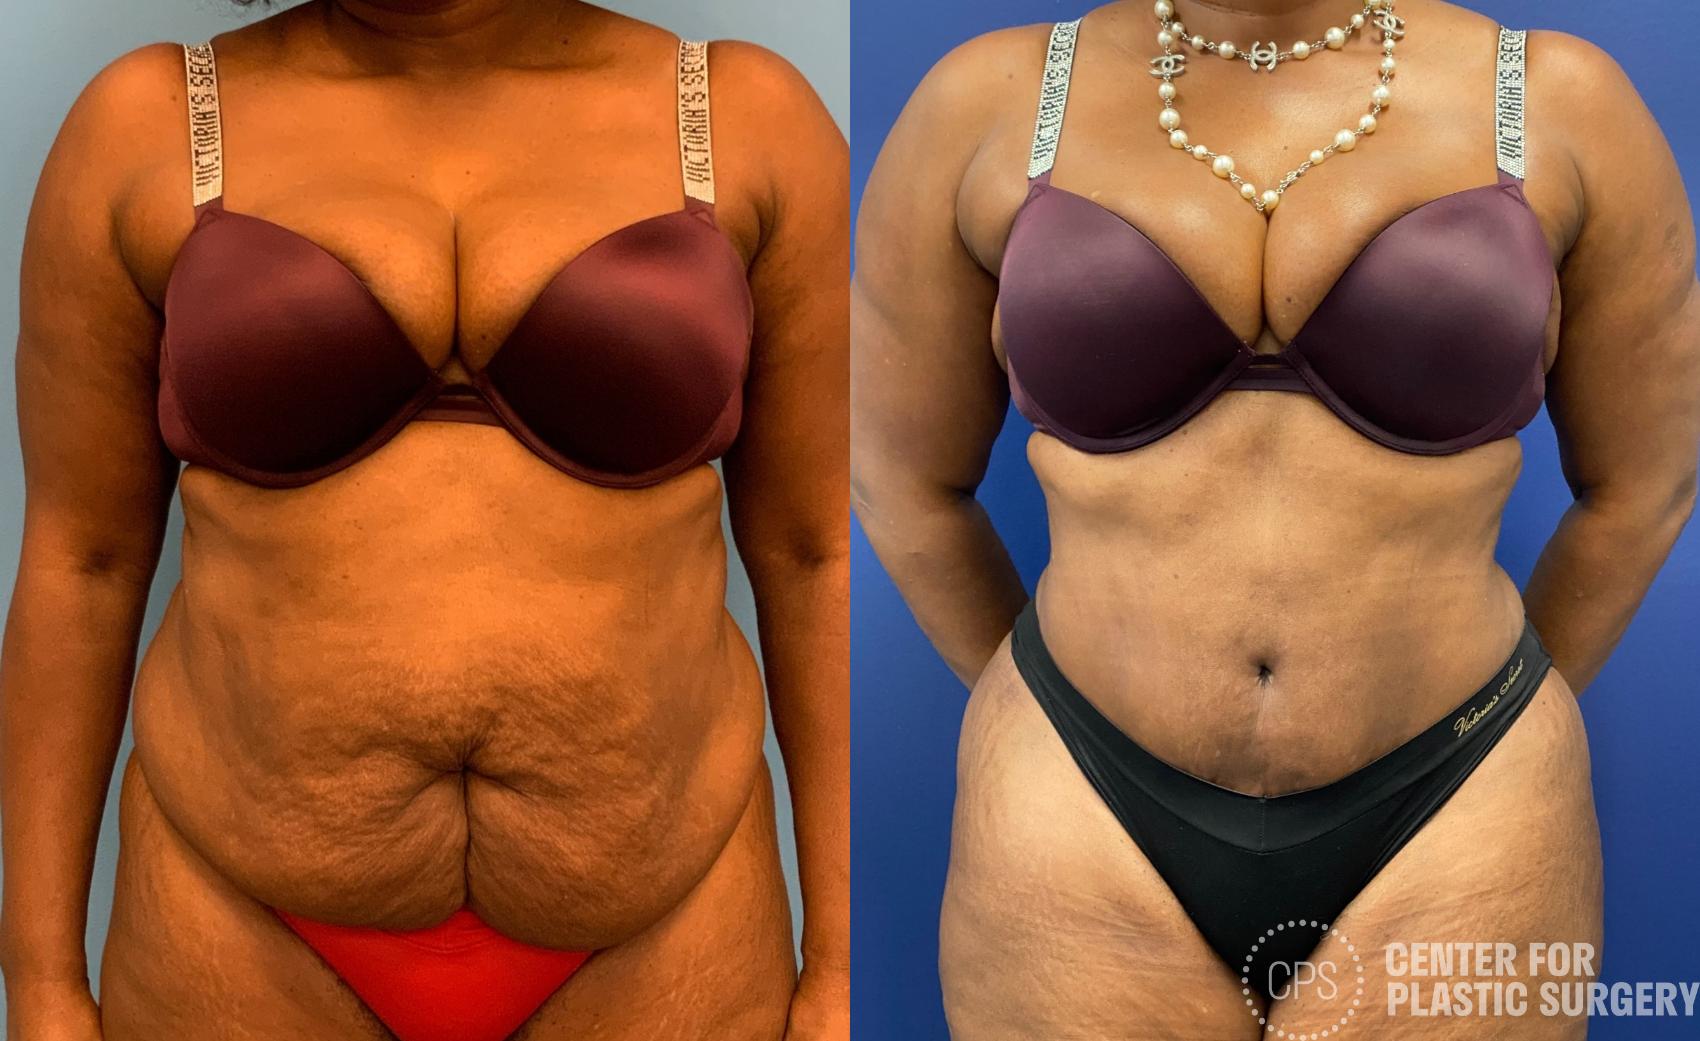 Plus Size Tummy Tuck Surgery Before & After Photo Gallery